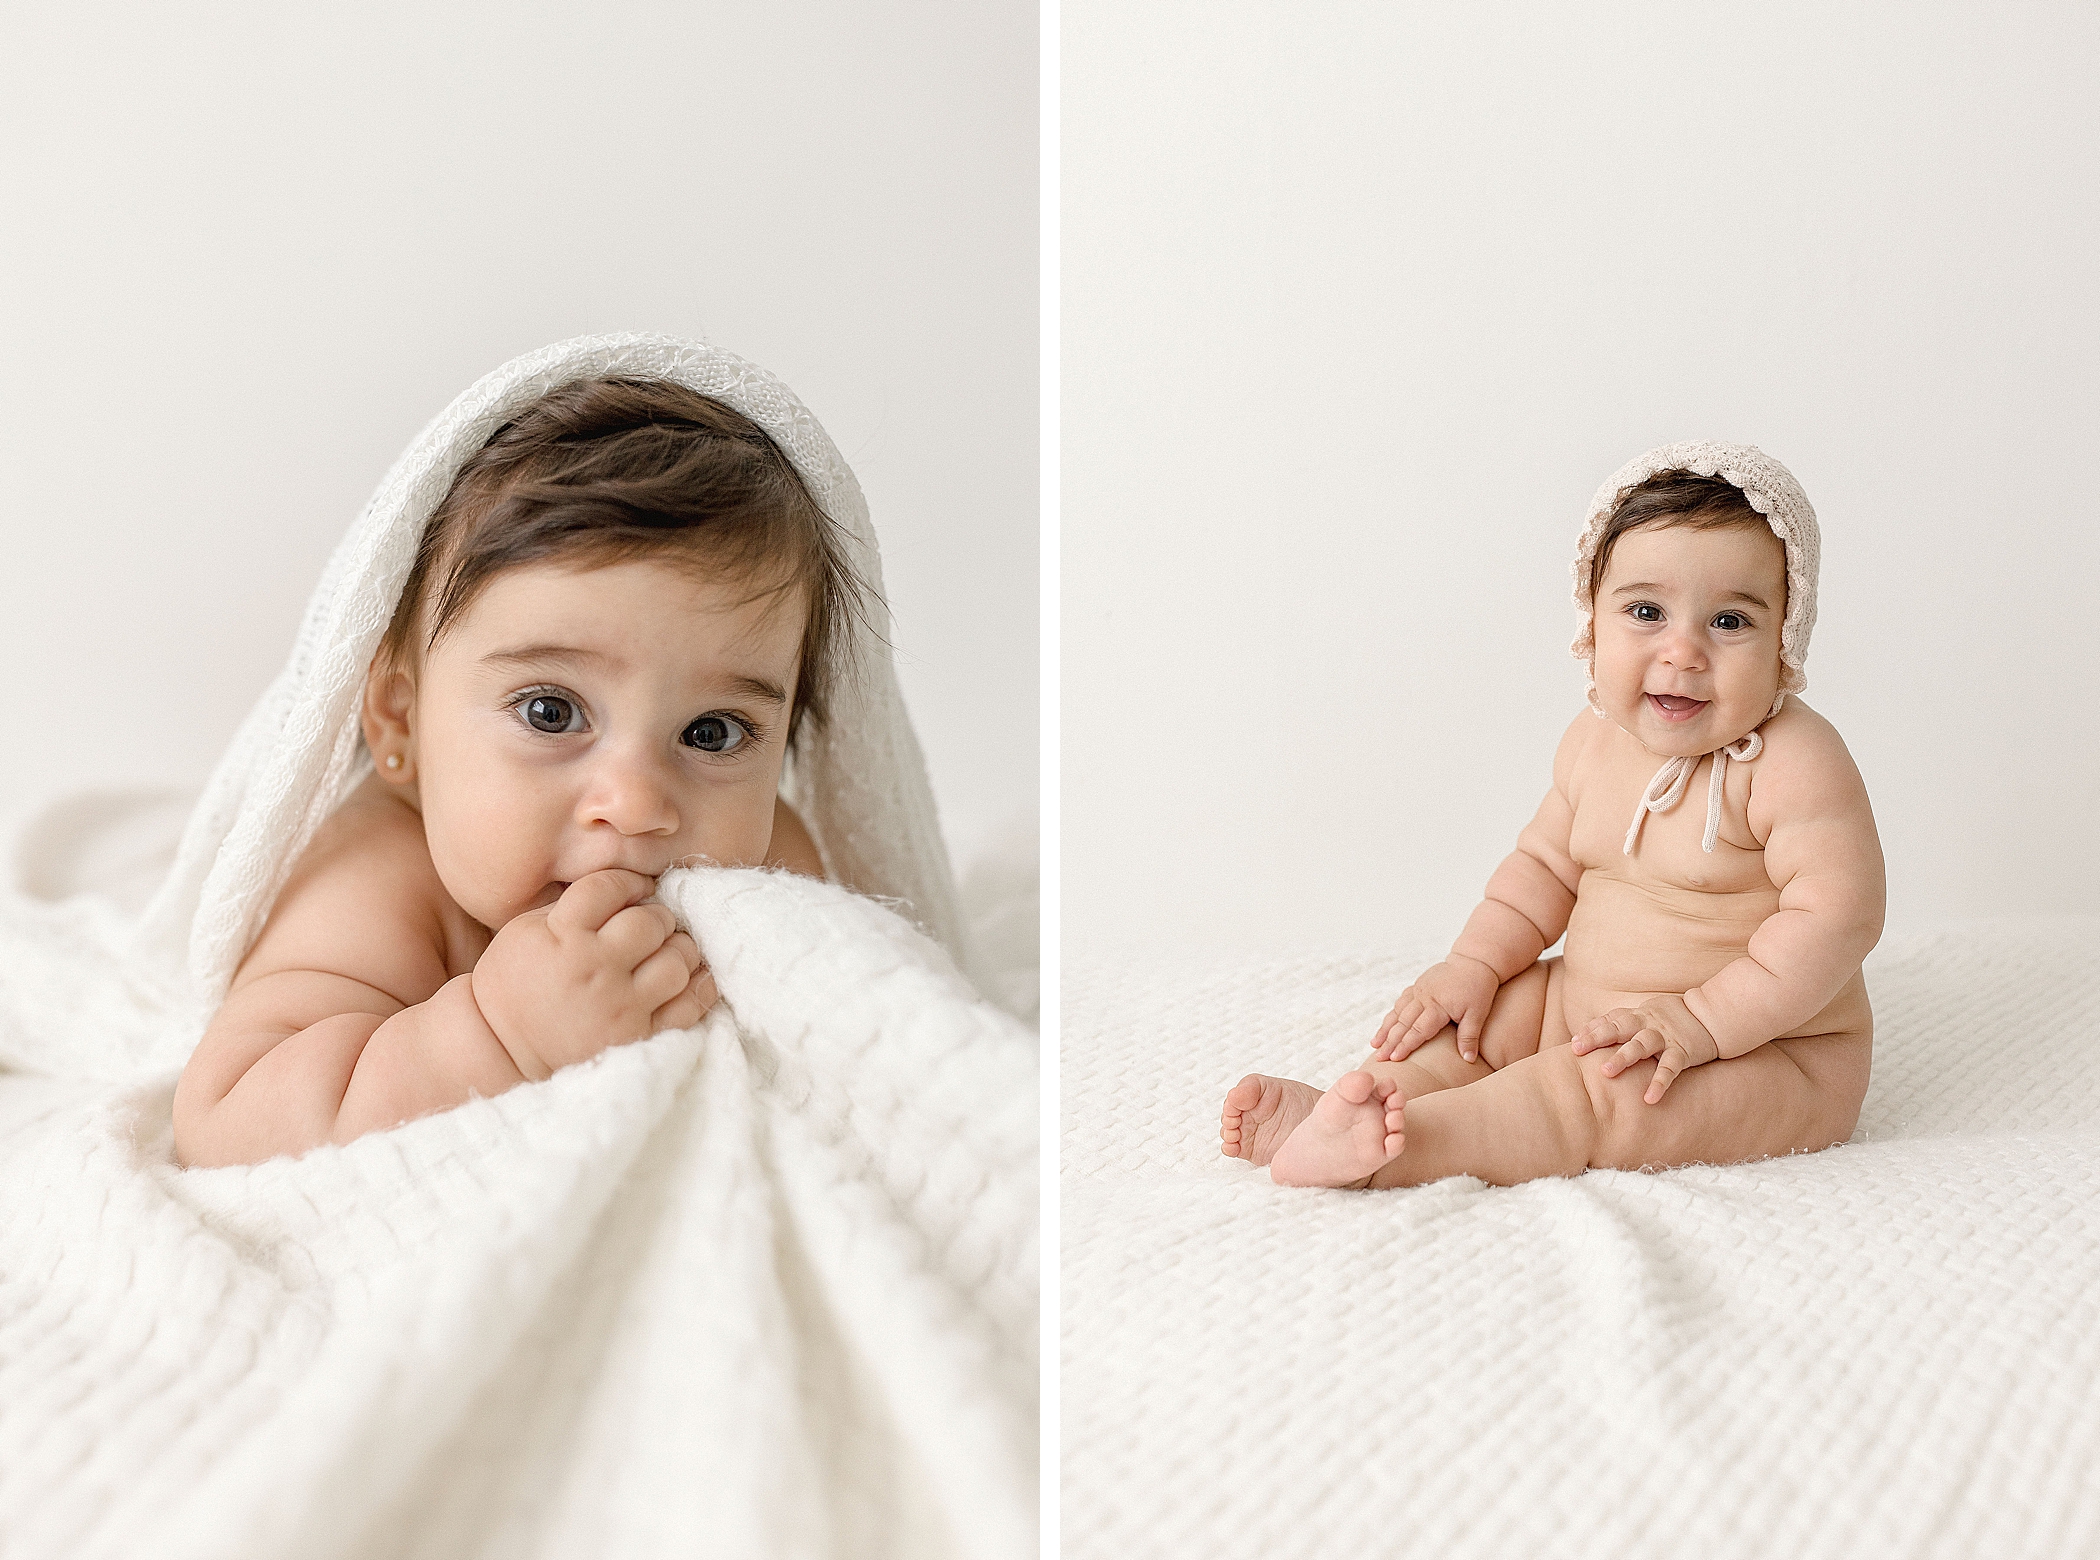 6 month old sitting up on the bed. Photo by Ivanna Vidal Photography